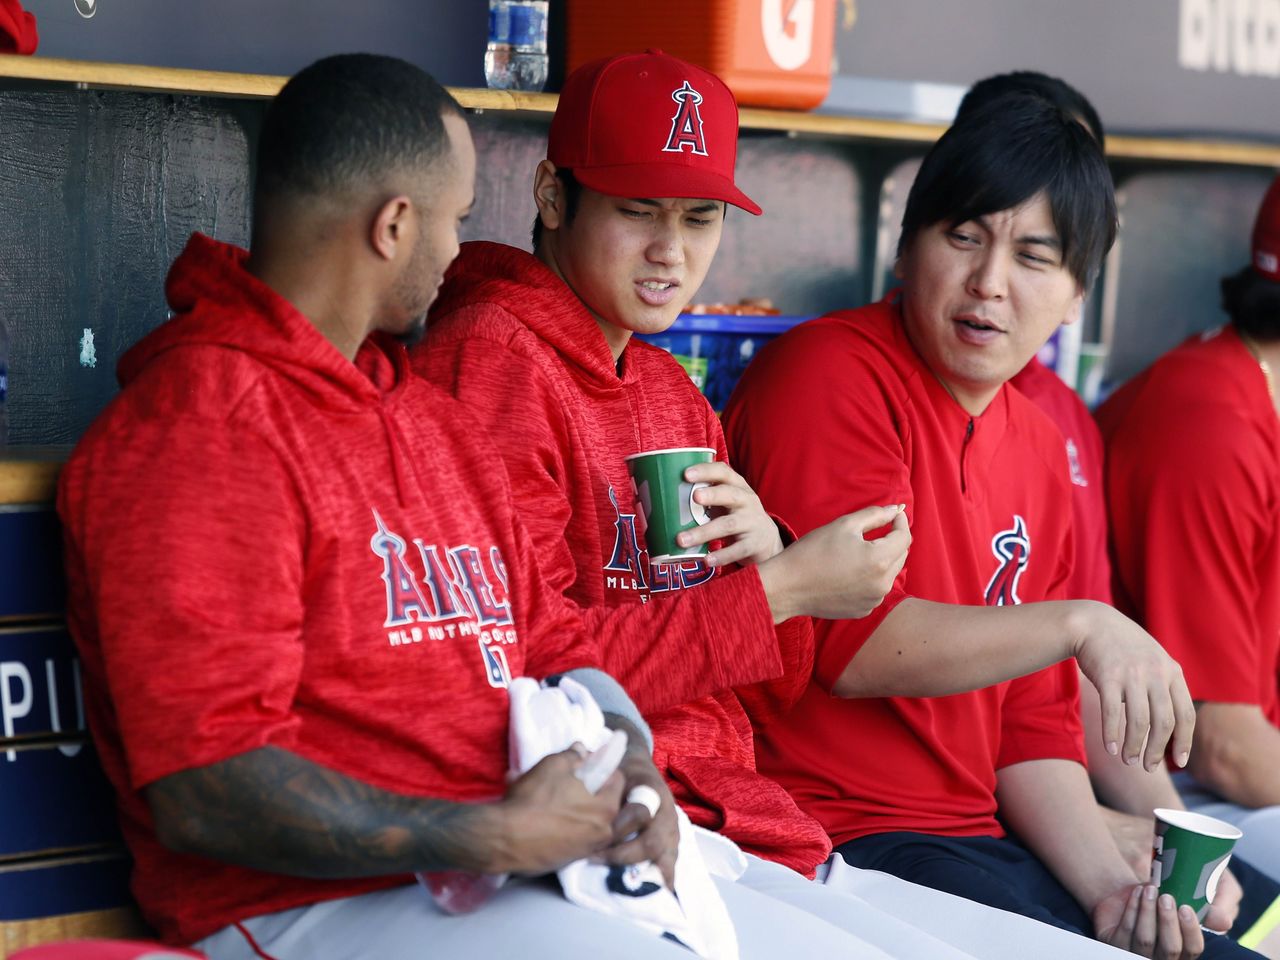 Mizuhara provides linguistic support on the bench during a game at Comerica Park in Detroit on May 31, 2018. He has a designated seat next to Ohtani in the dugout, and the two are rarely apart while at the ball park. (© AFP/Jiji)